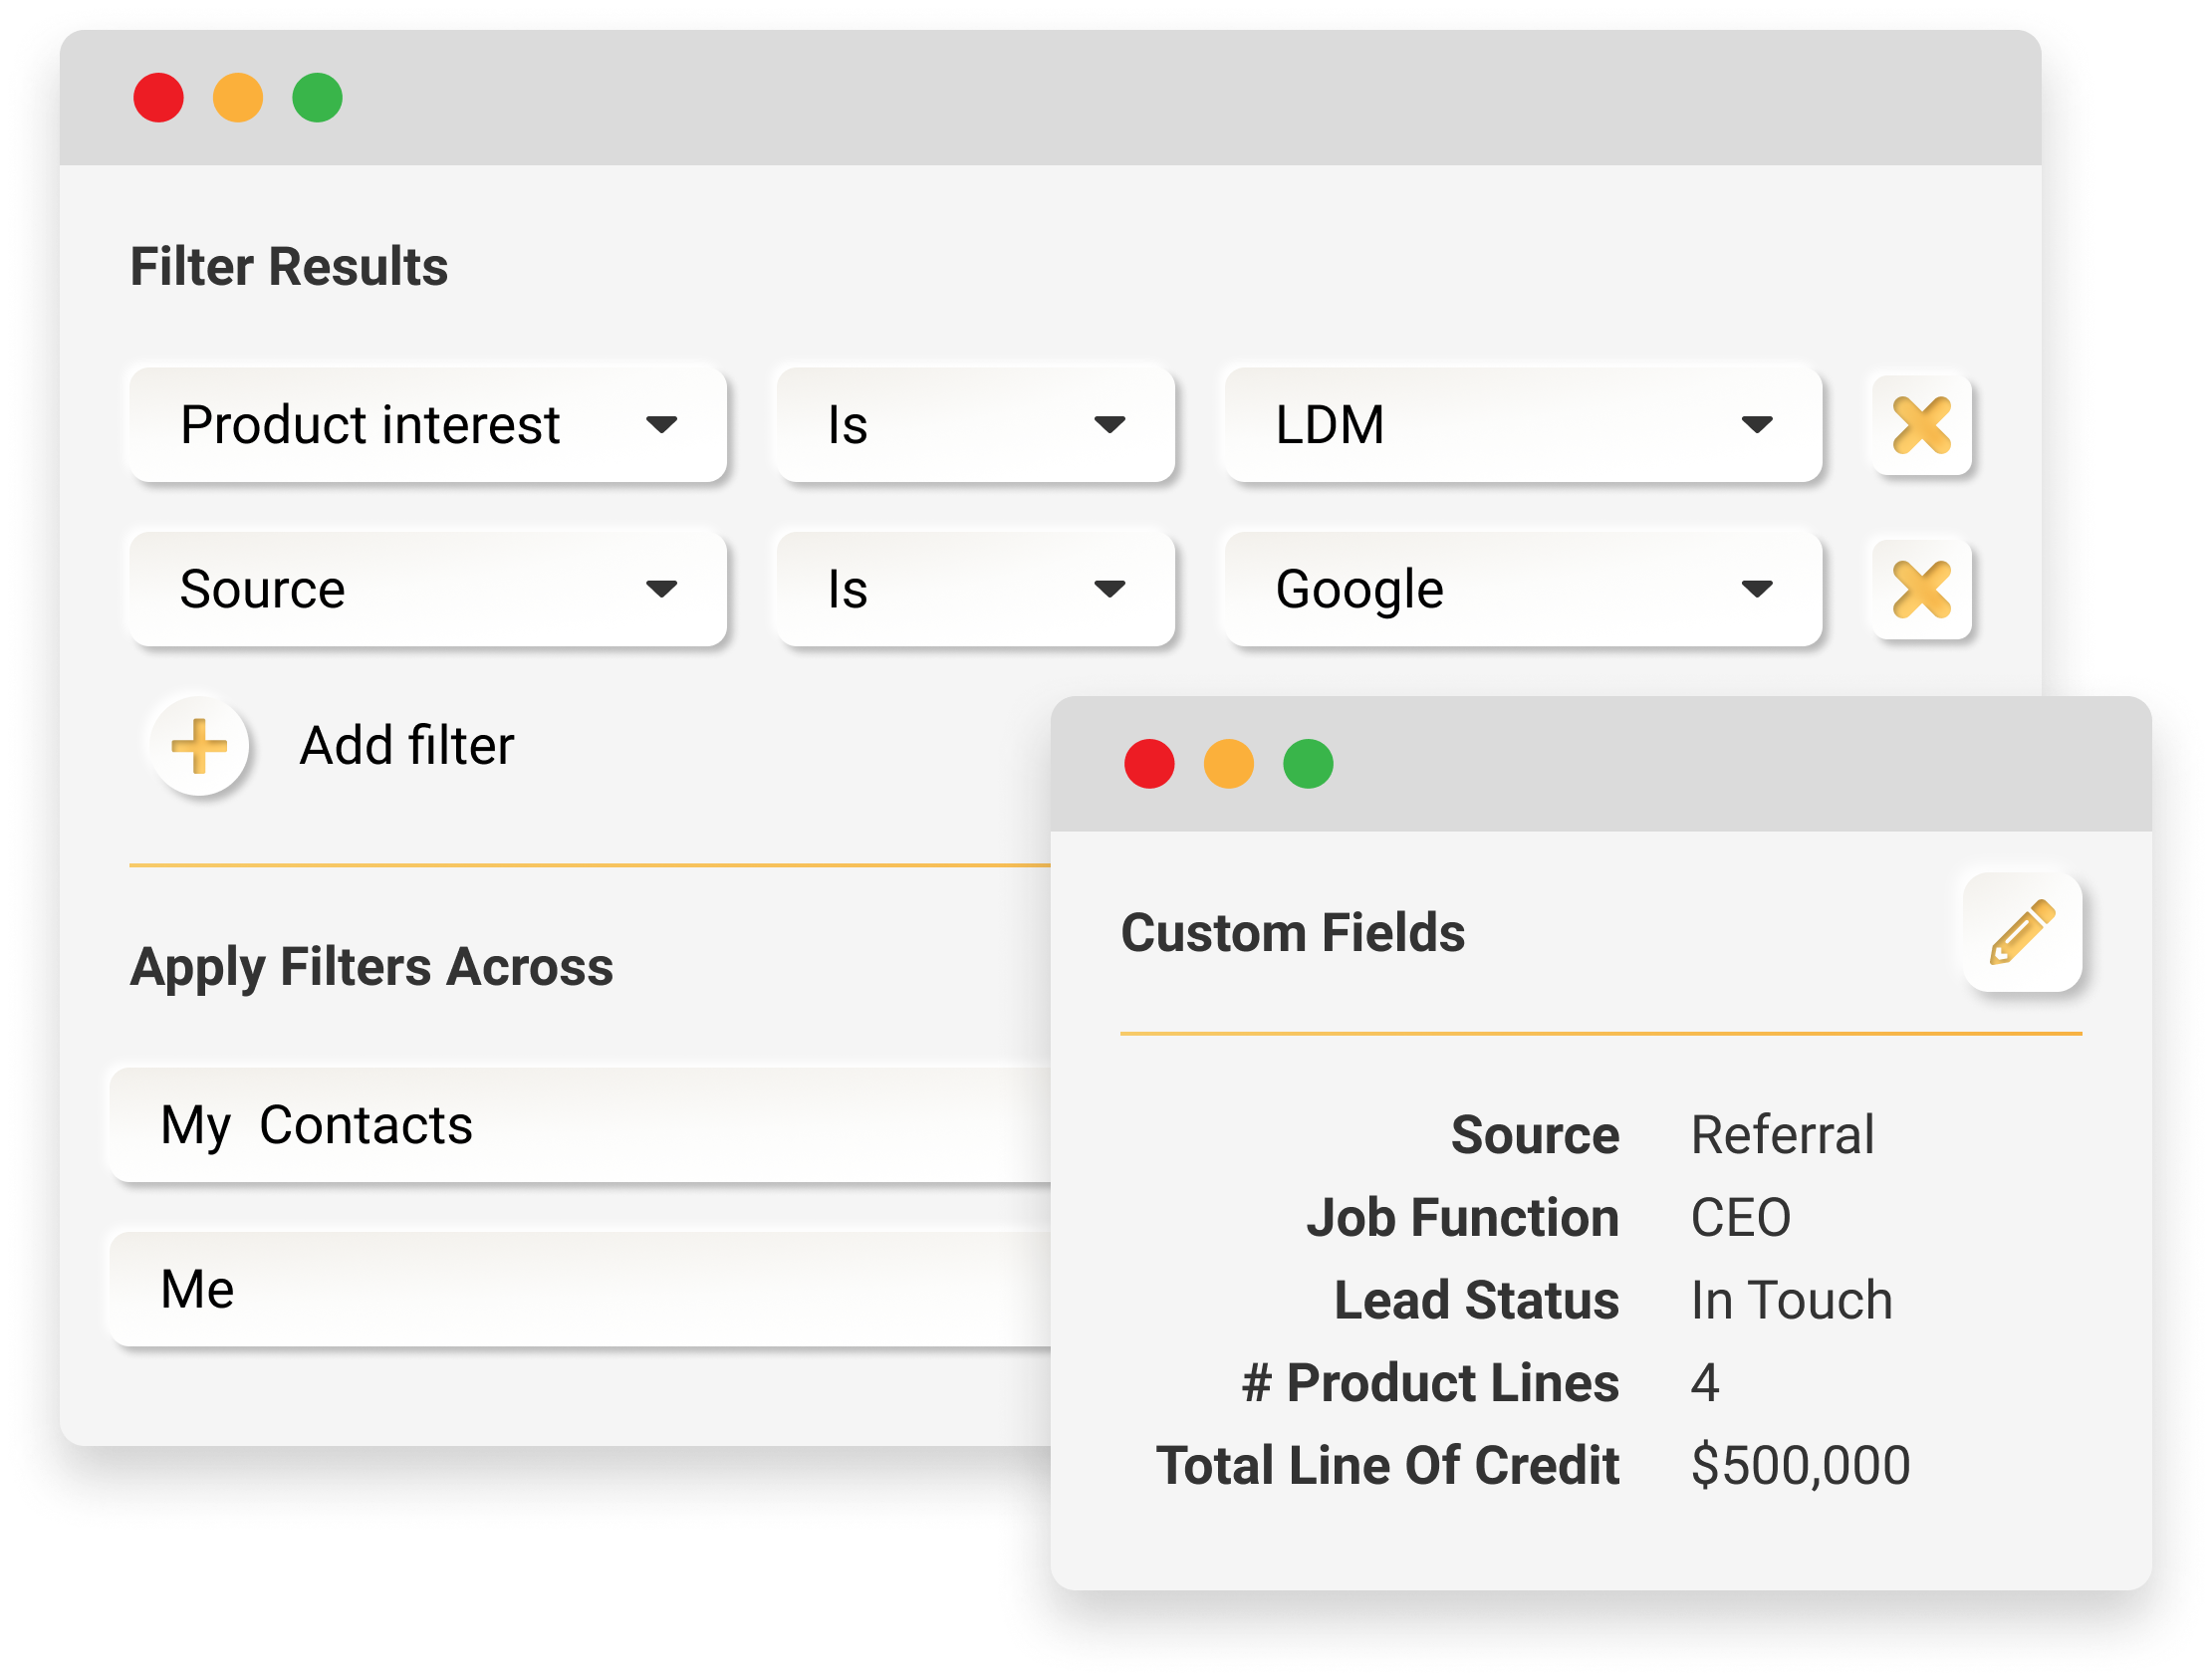 Configure the tool, not the way you do business. Pull up actionable information fast with filter views. Track what's important to your business with custom fields.